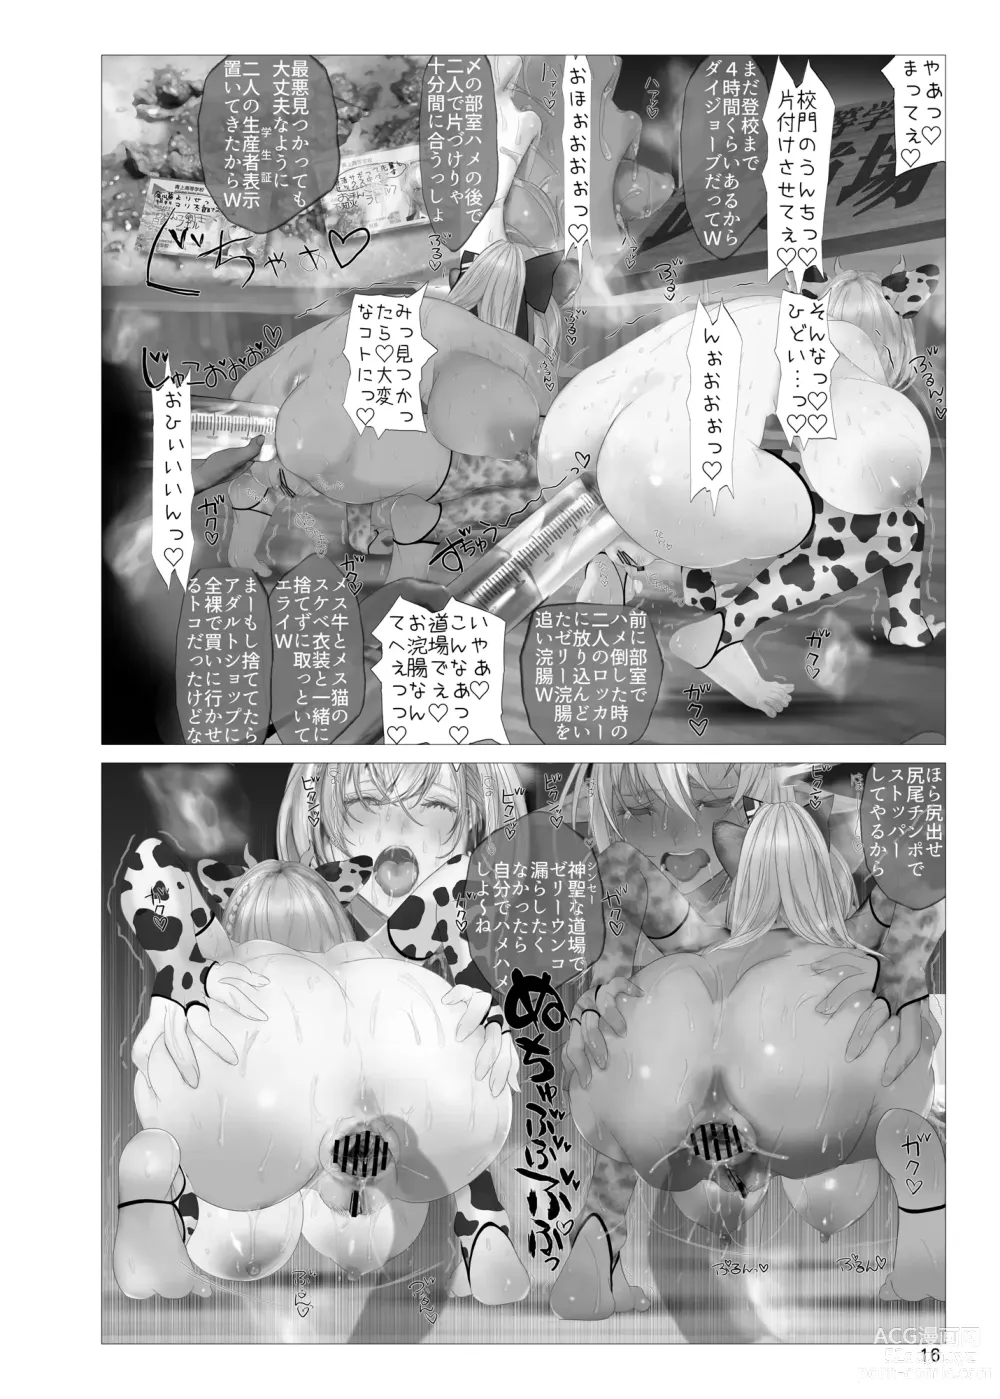 Page 15 of doujinshi NTR Noelf Lesson